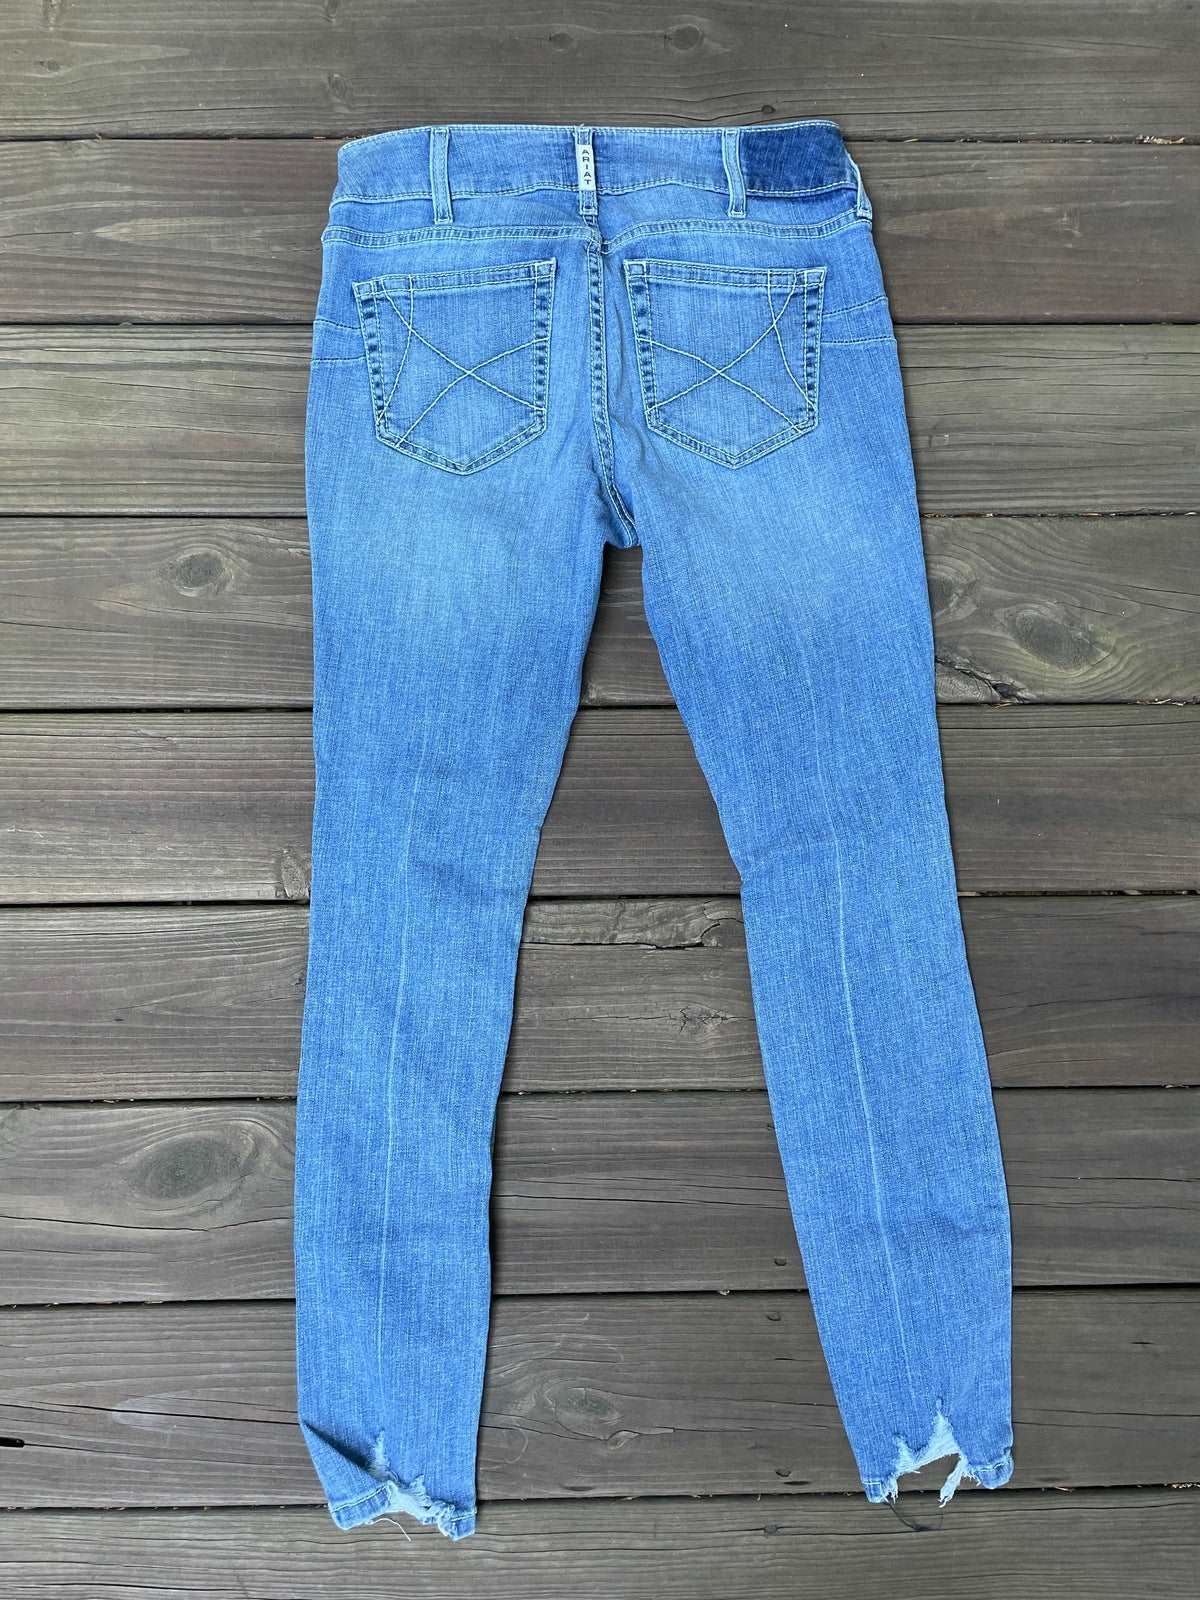 ThriftedEquestrian Clothing 29R Ariat Real Denim Ripped Skinny Jeans - 29R